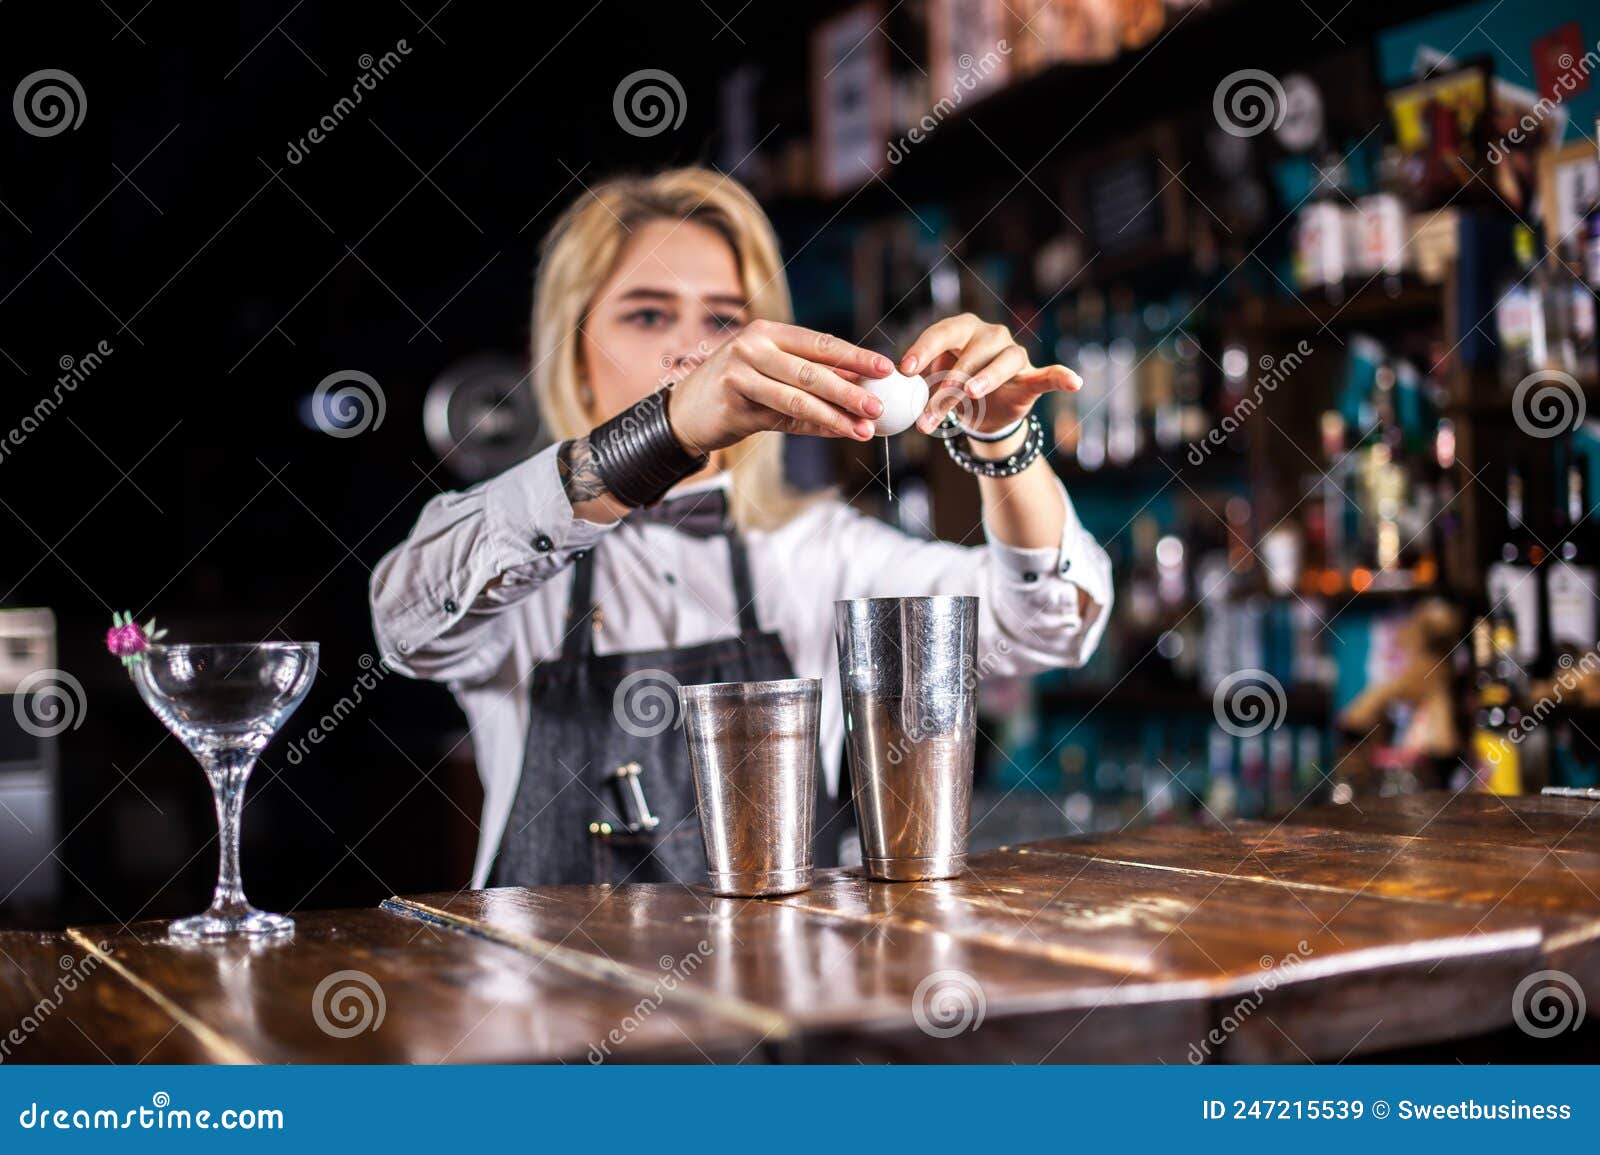 Girl Bartender Makes a Cocktail at the Brasserie Stock Image - Image of ...